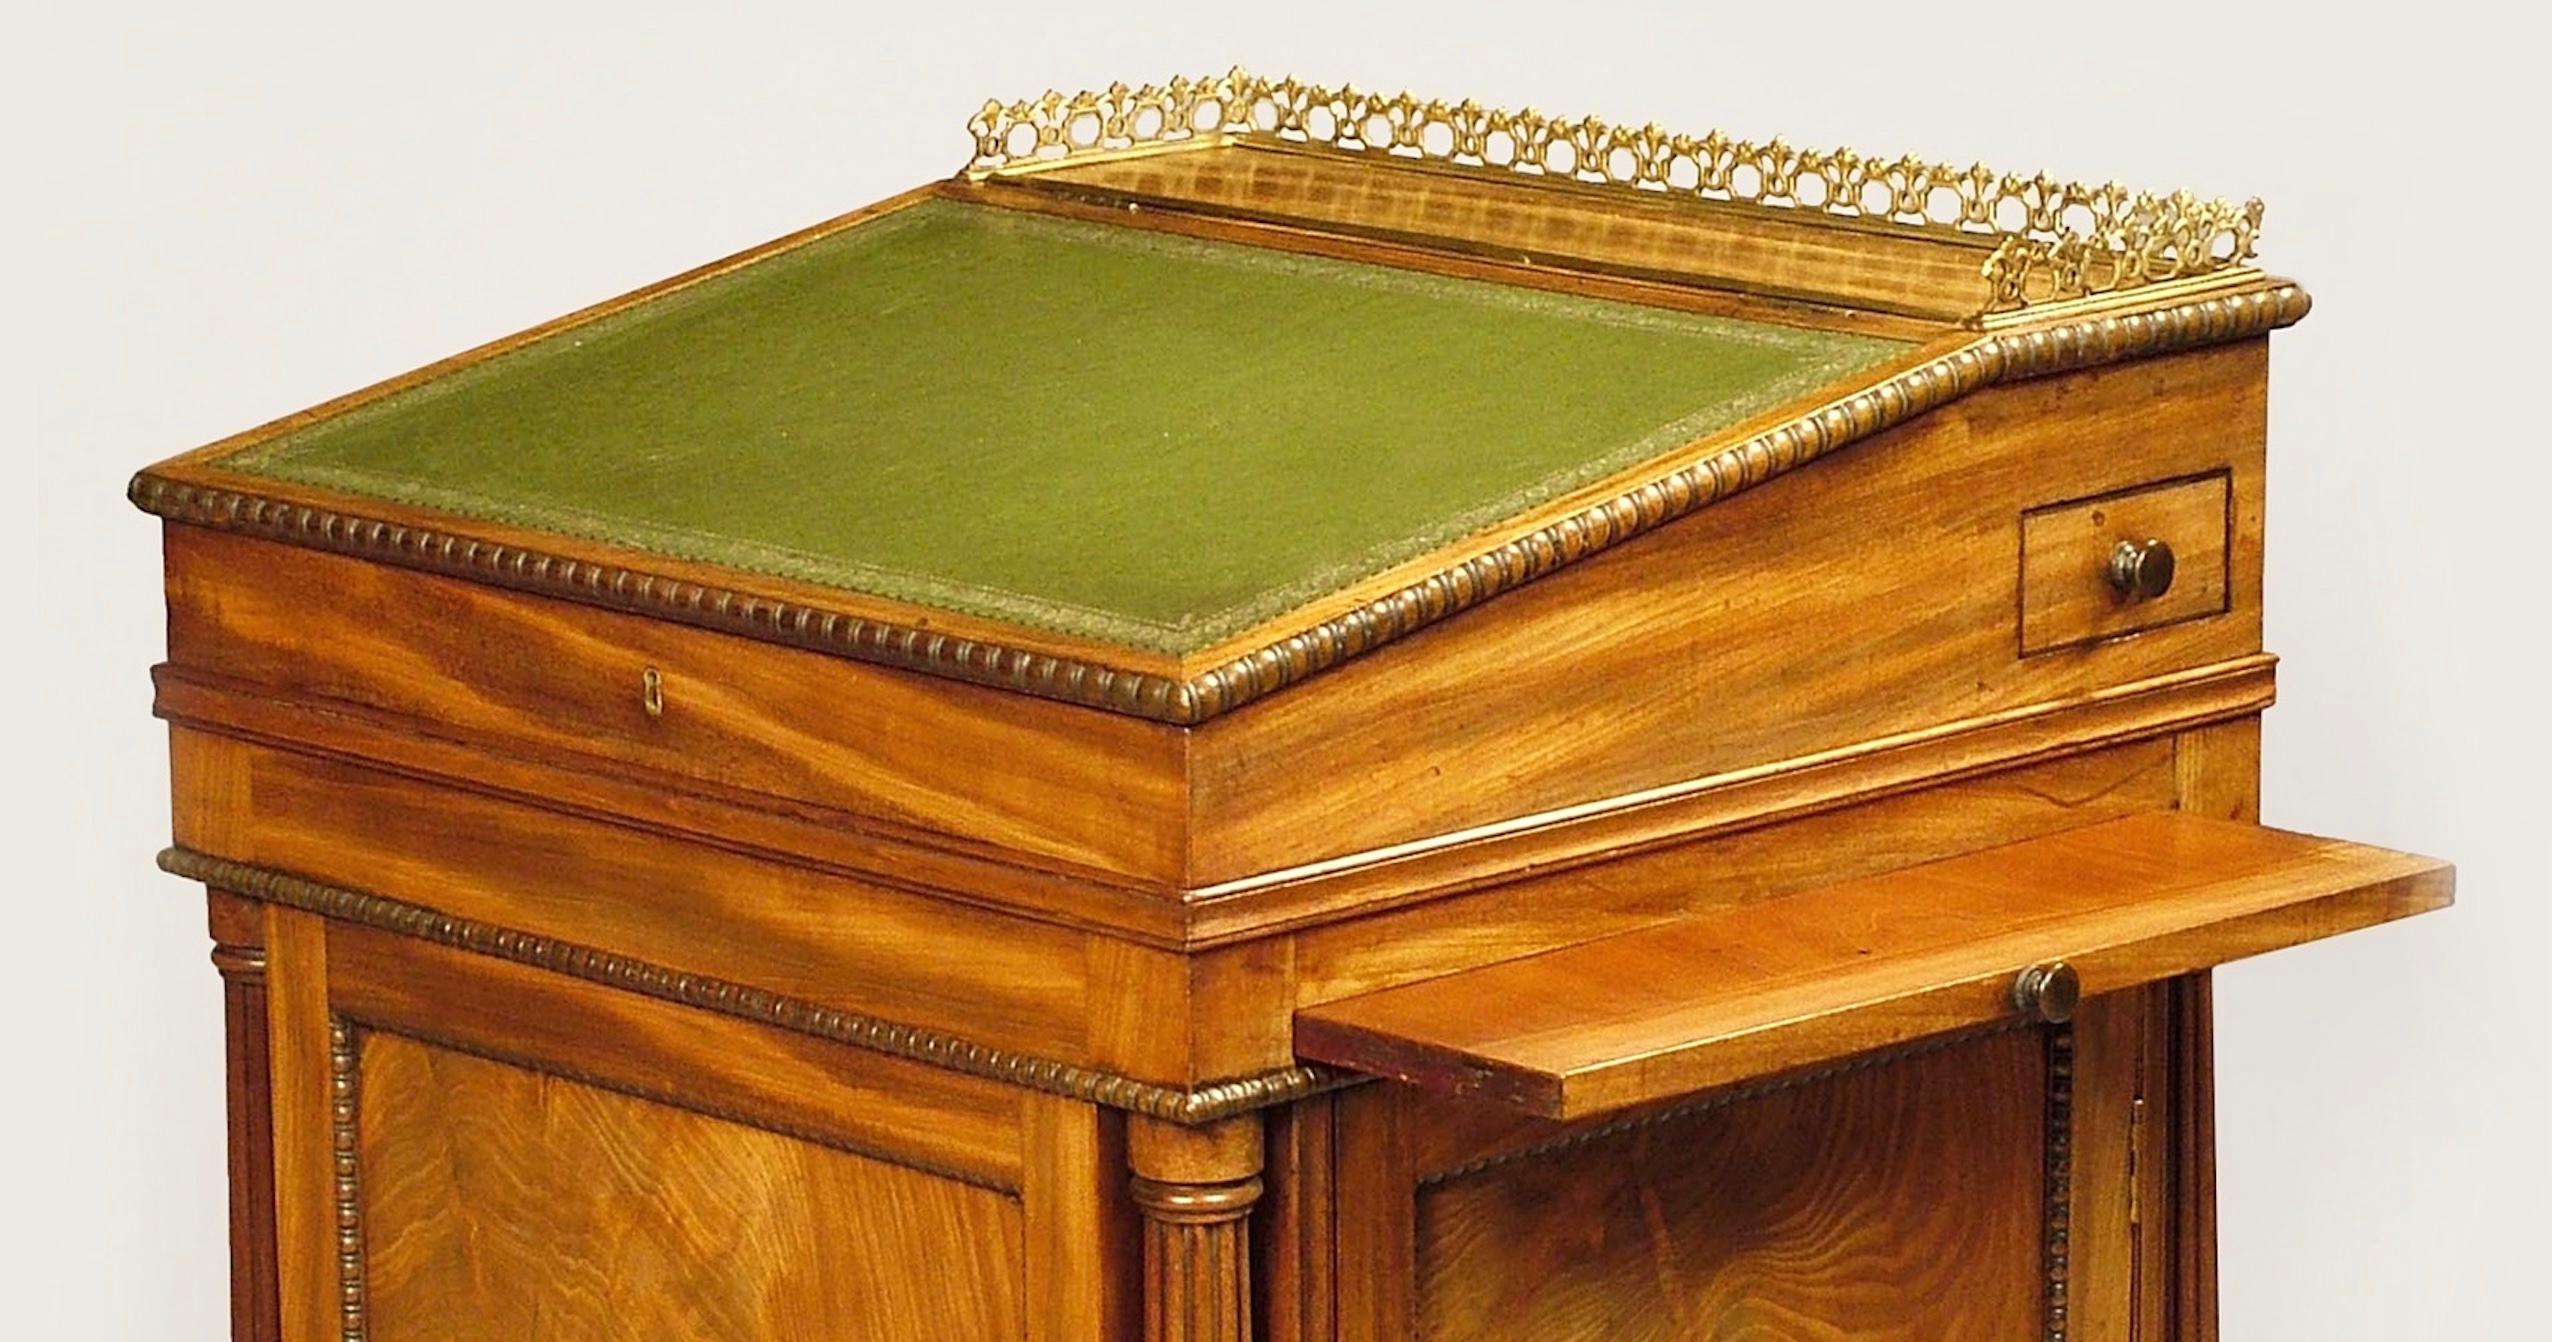 English Georgian Period Mahogany Davenport Desk with Green Leather Writing Surface For Sale